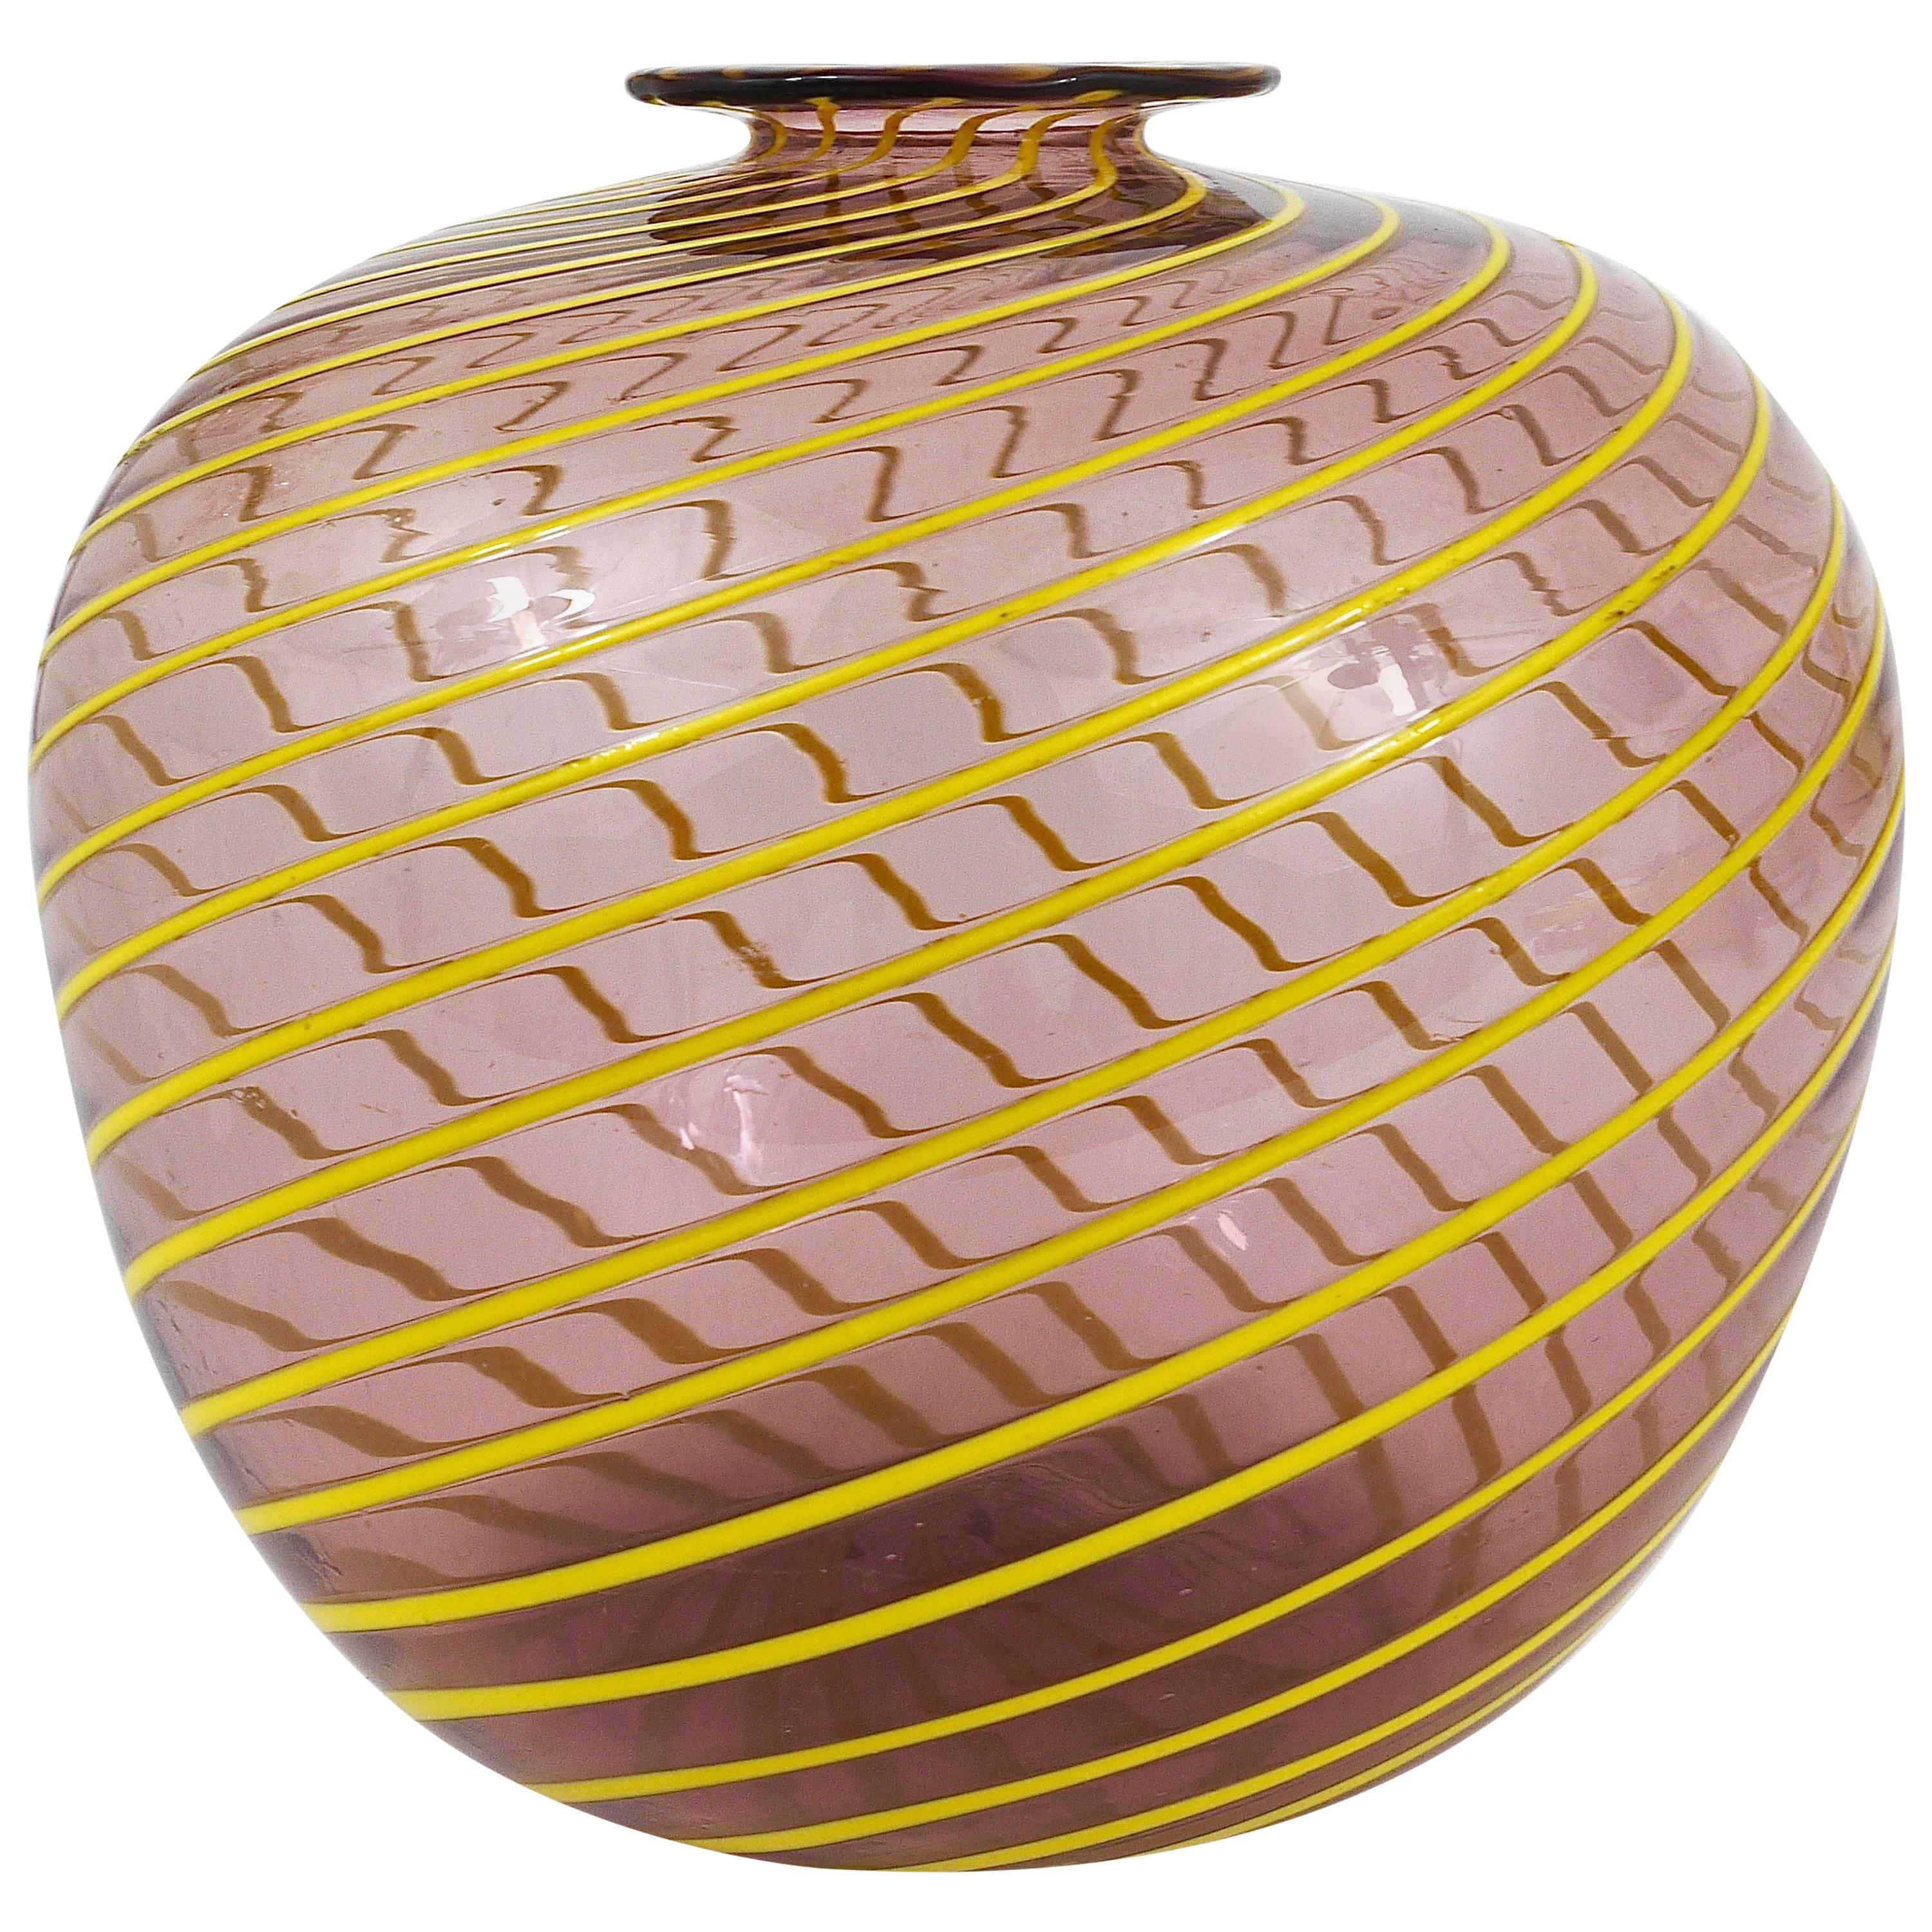 Fratelli Toso Big Purple Murano Swirl Vase with Yellow Stripes, Italy, 1950s